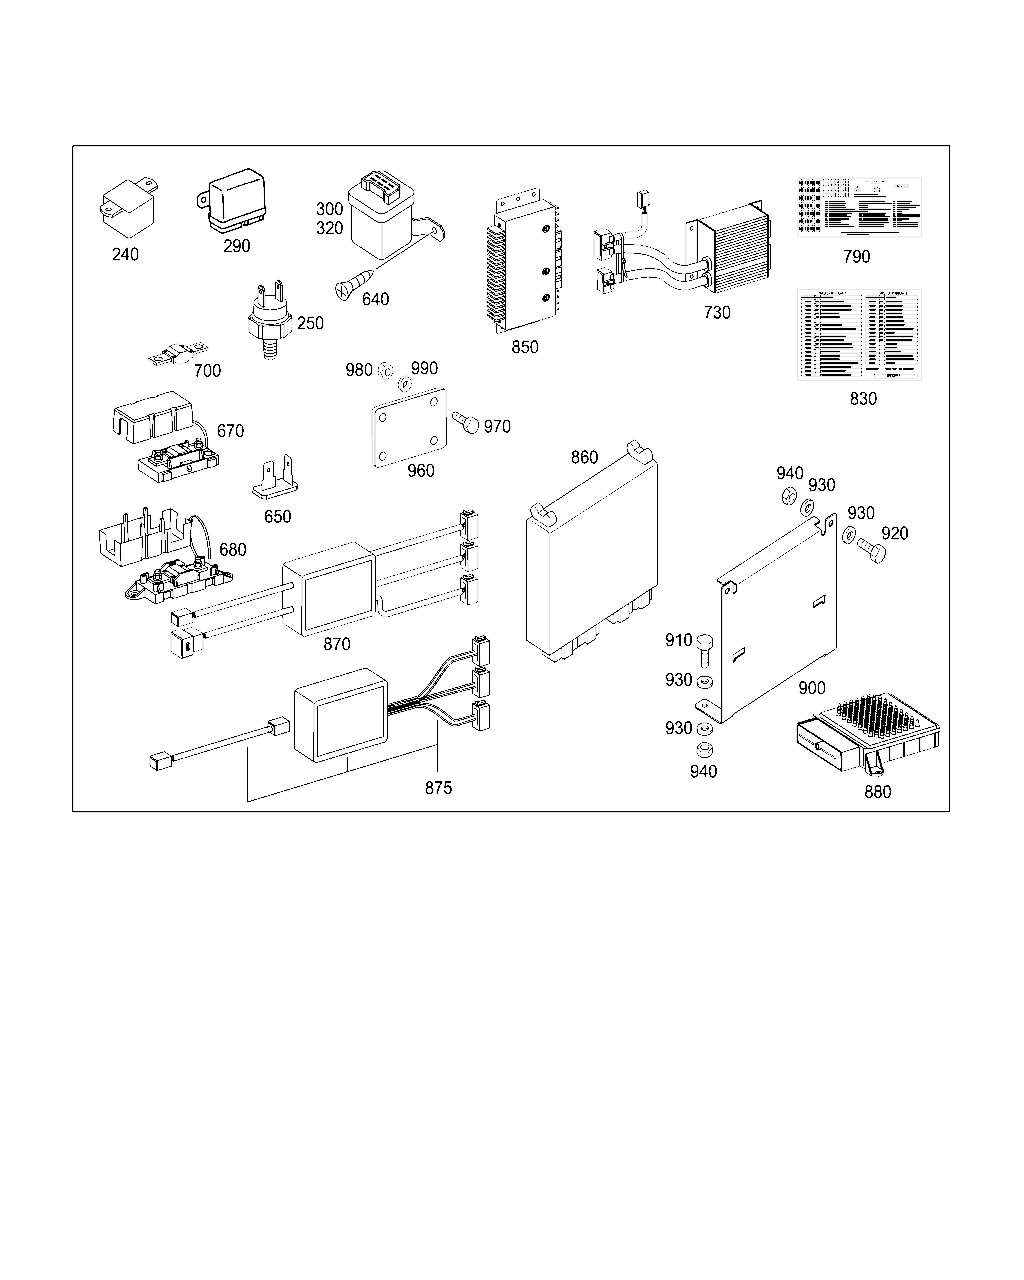 APPARATUS PLATE AND CONTROL UNITS [Автобус] MERCEDES [ЕВРОПА] [ШАССИ]OMC 1628